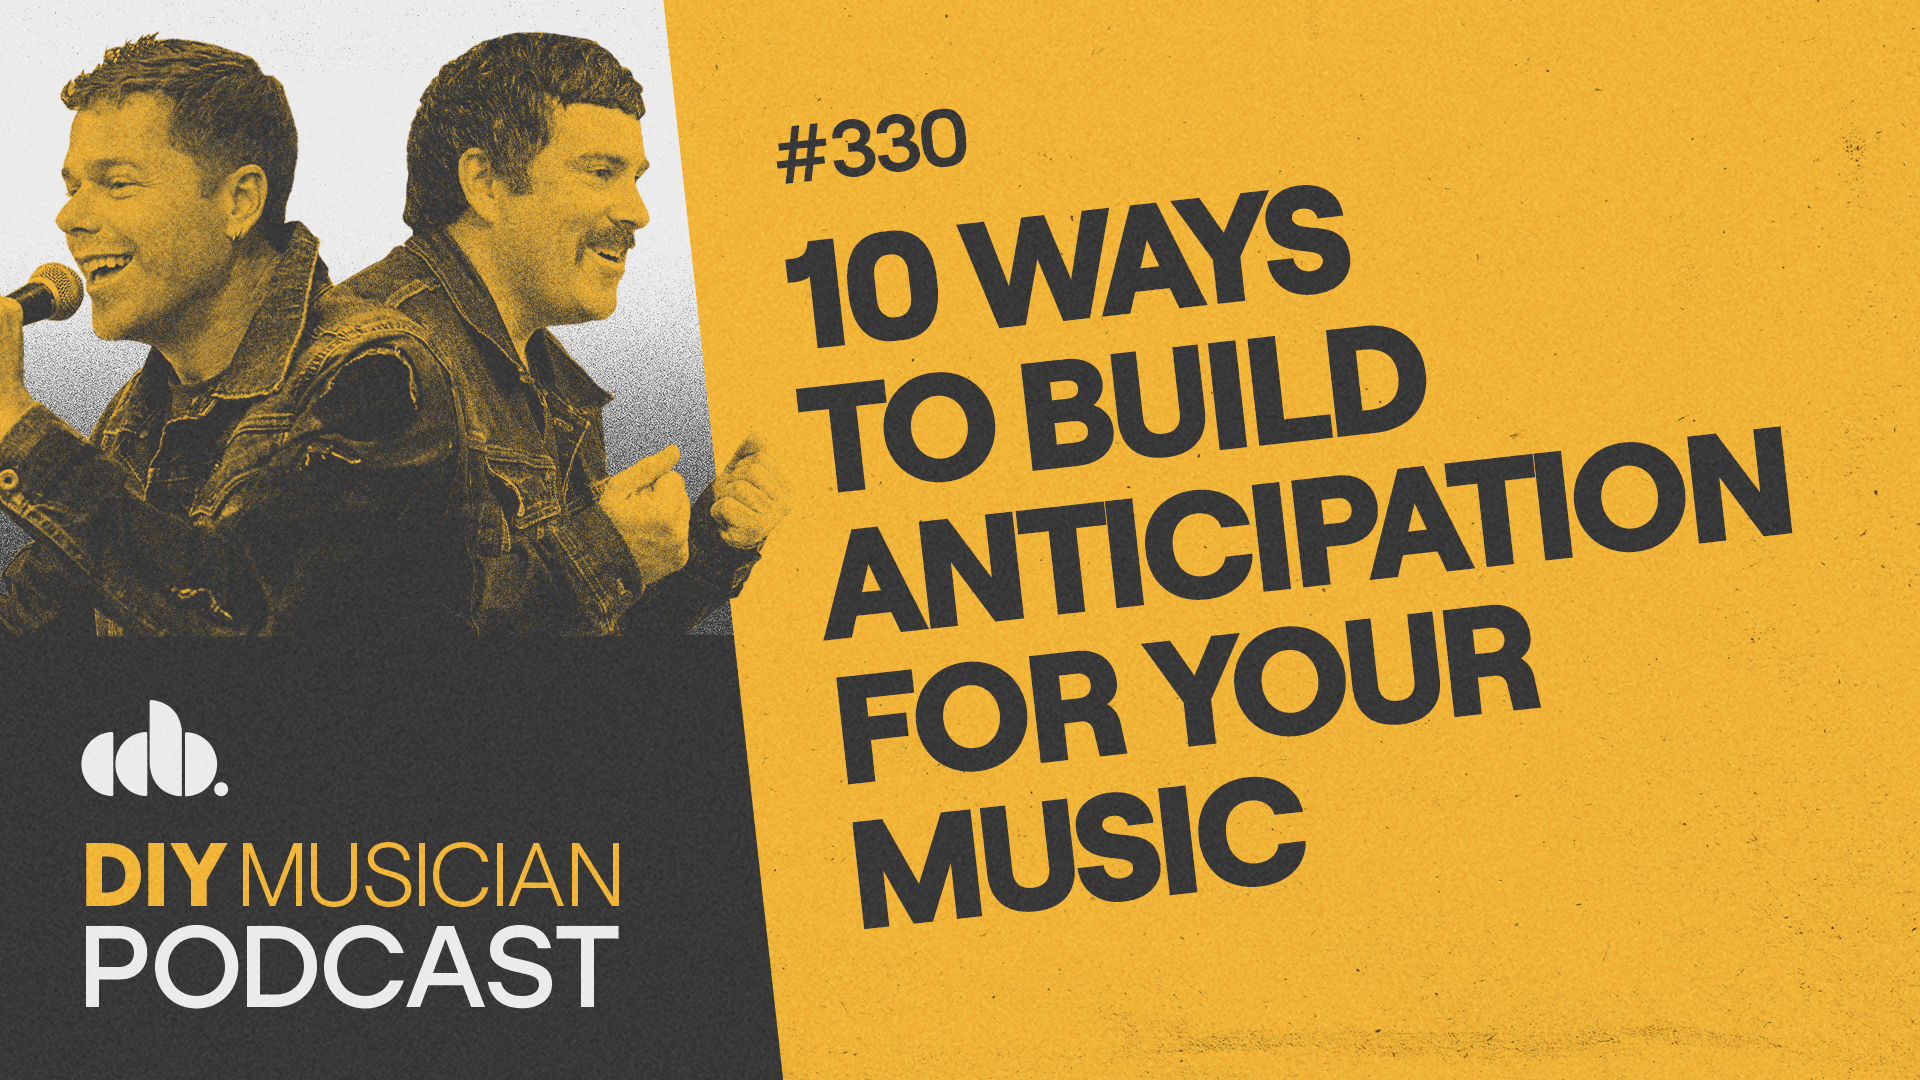 10 Ways to Build Anticipation for Your New Music